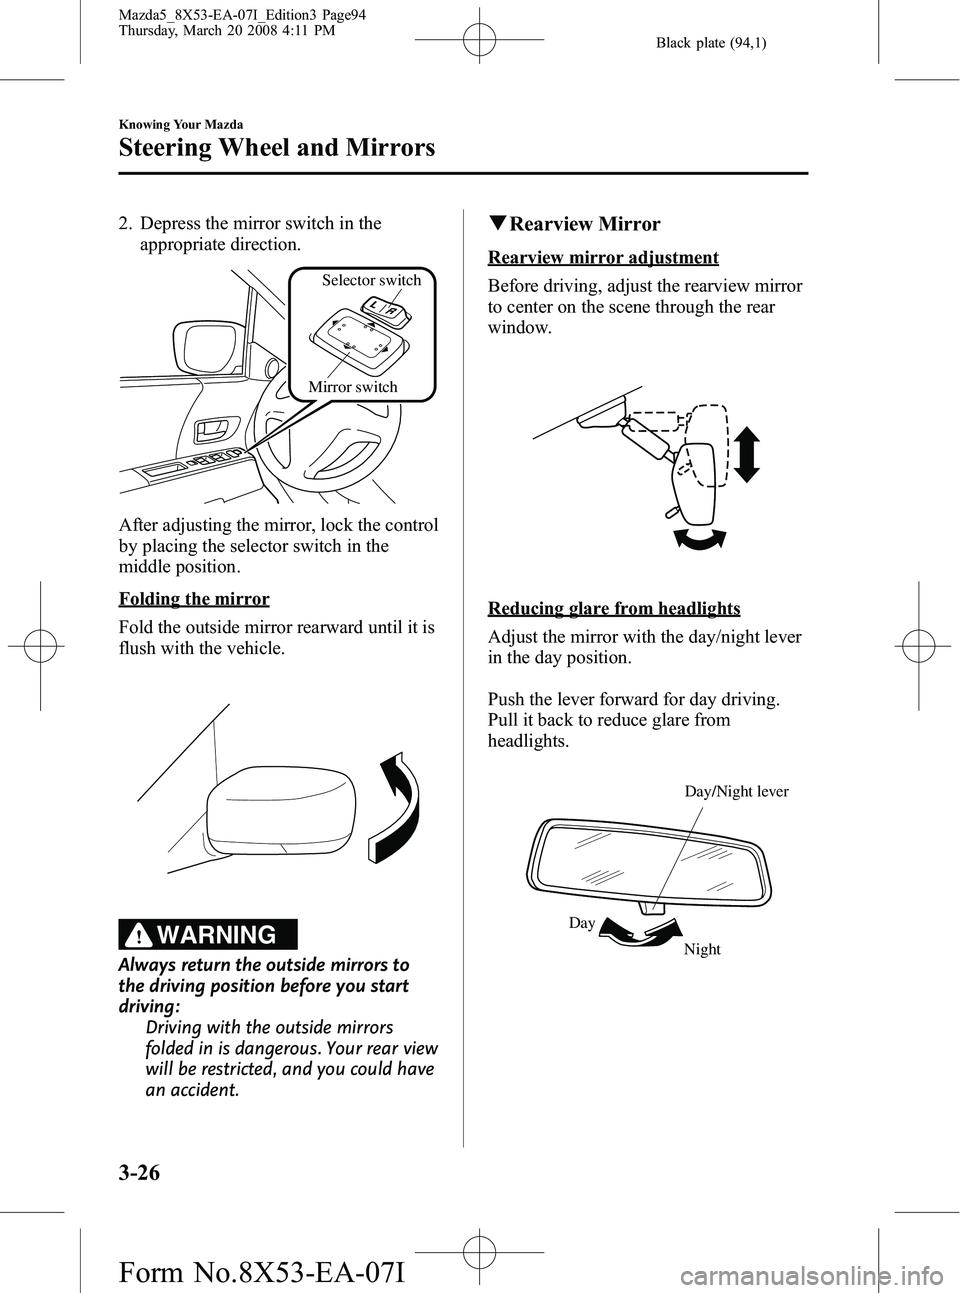 MAZDA MODEL 5 2008  Owners Manual Black plate (94,1)
2. Depress the mirror switch in theappropriate direction.
Mirror switchSelector switch
After adjusting the mirror, lock the control
by placing the selector switch in the
middle posi